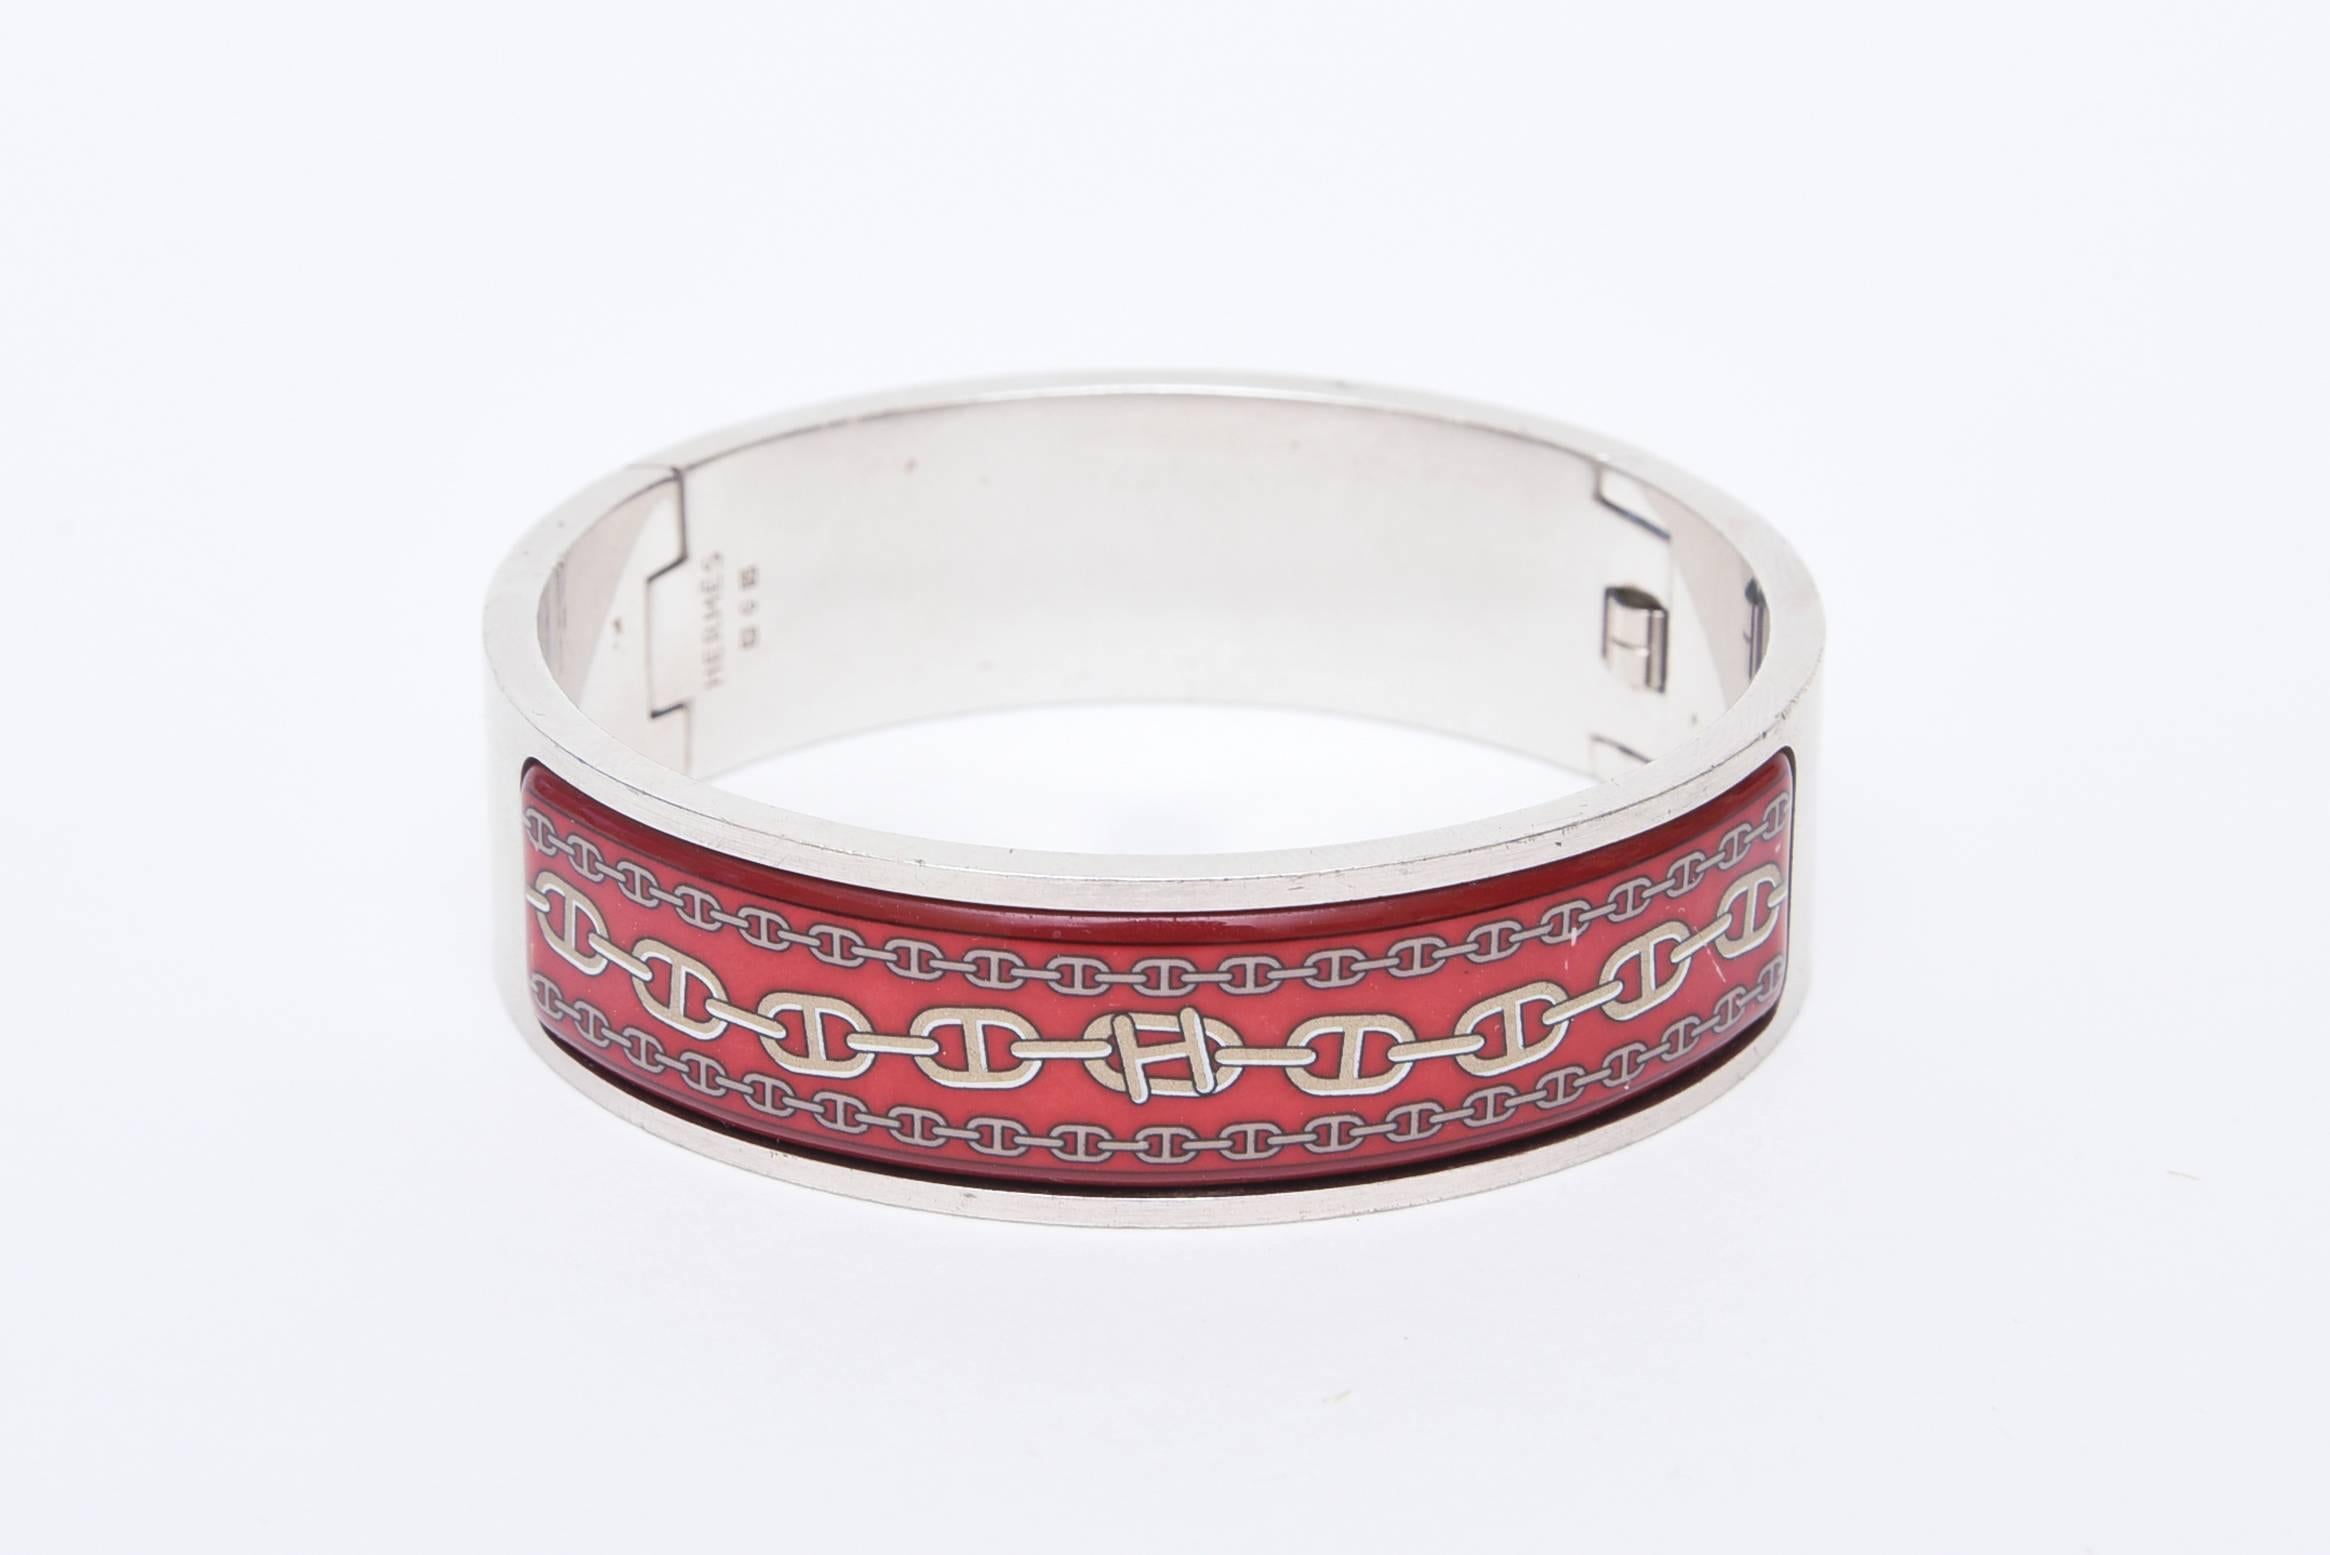 This rare and early enamel and brushed stainless steel closed bracelet was designed by Martin Margiela for Hermes around 1998.
The enamel design is Hermes links with the H in the center.
This is a rolled hinged bracelet clasp. This is